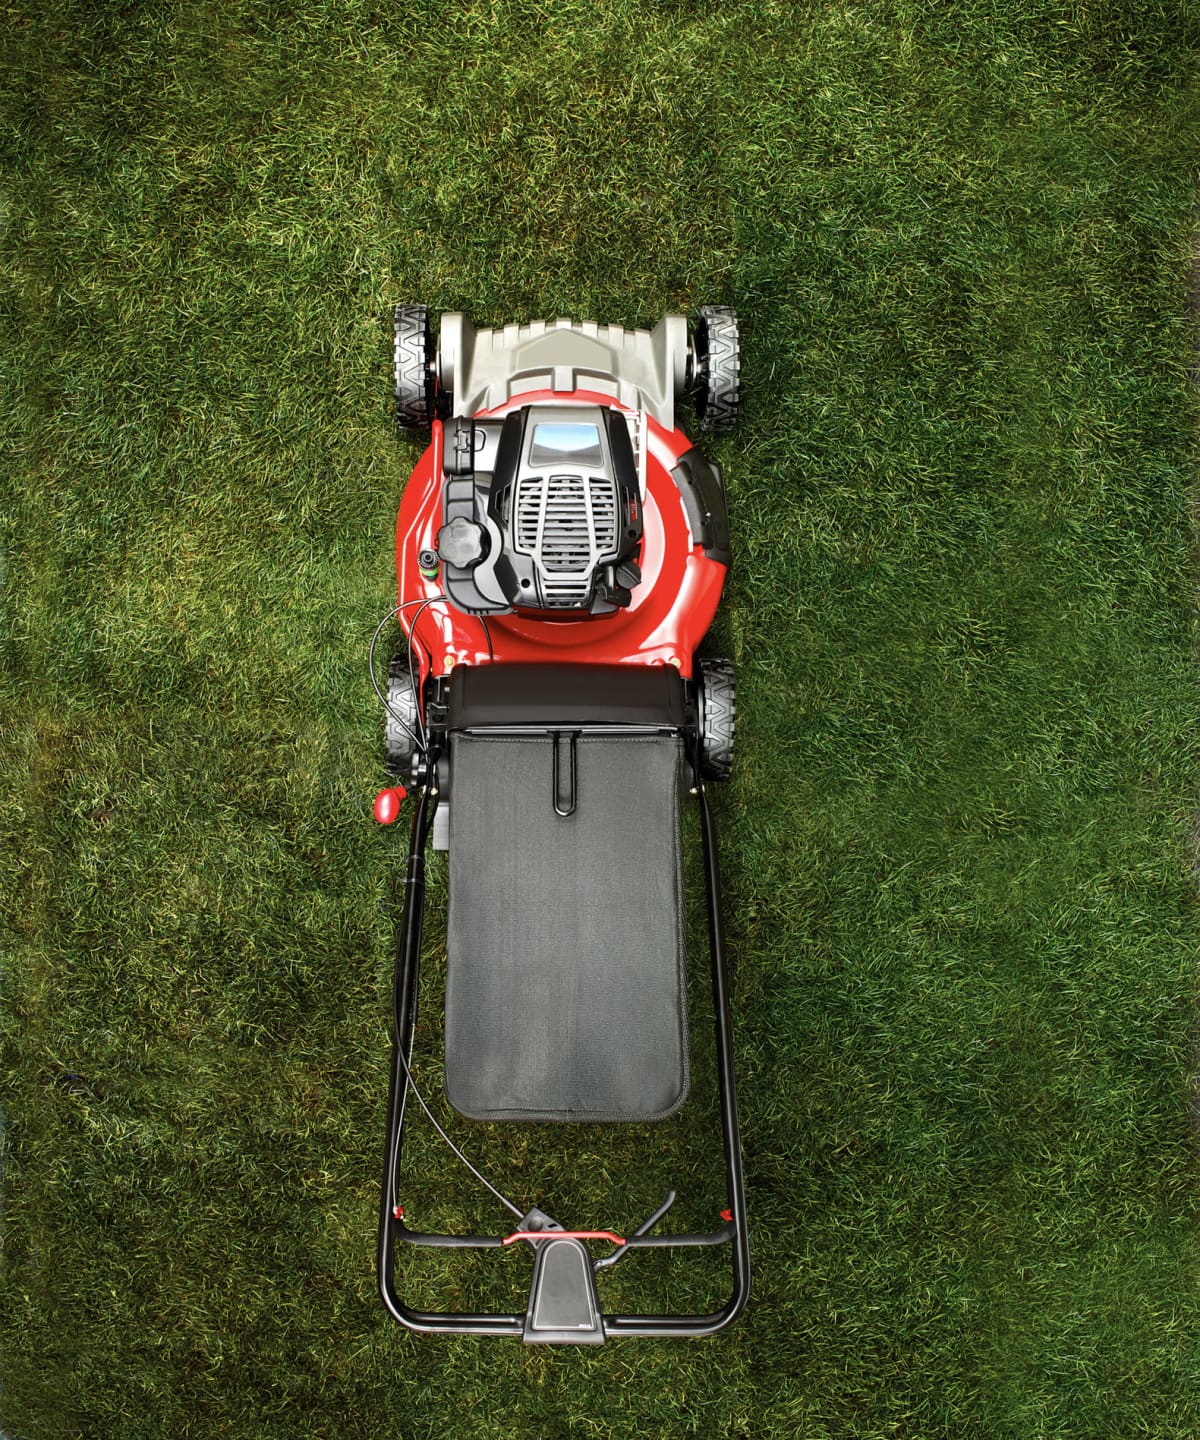 A high powered lawn mower on grass represents the responsibilities of home ownership: upkeep, maintenance, and attention to detail.